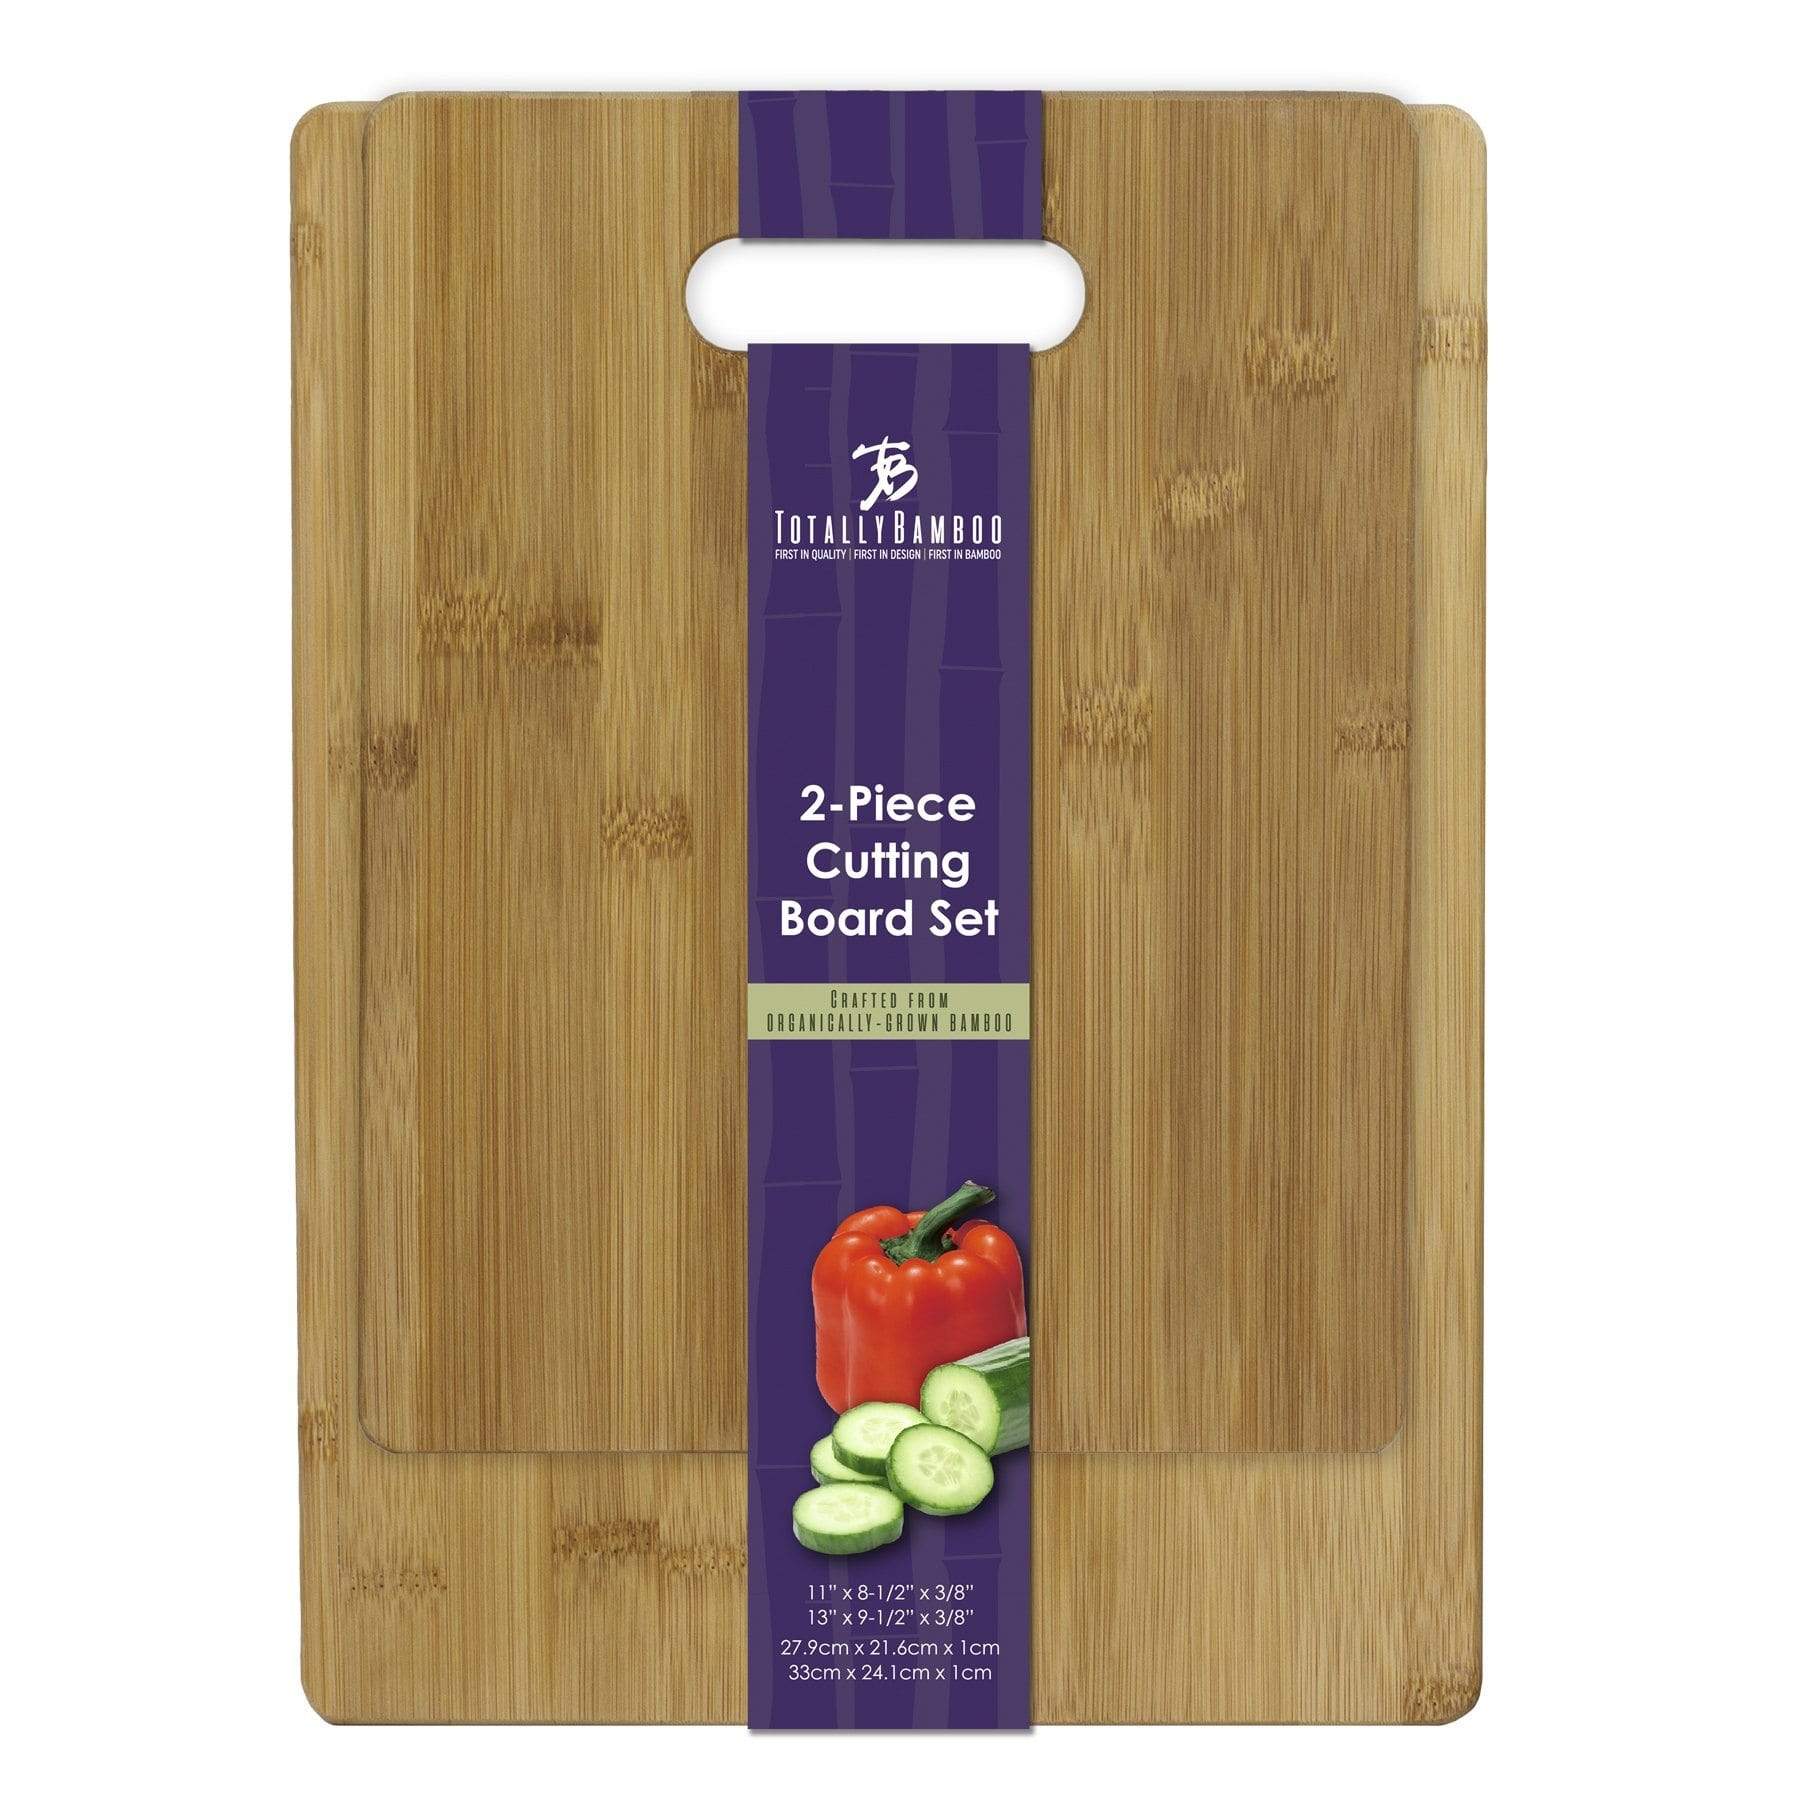 Totally Bamboo Two-Piece Bamboo Cutting Board Set, 13" x 9-1/2" and 11" x 8-1/2"